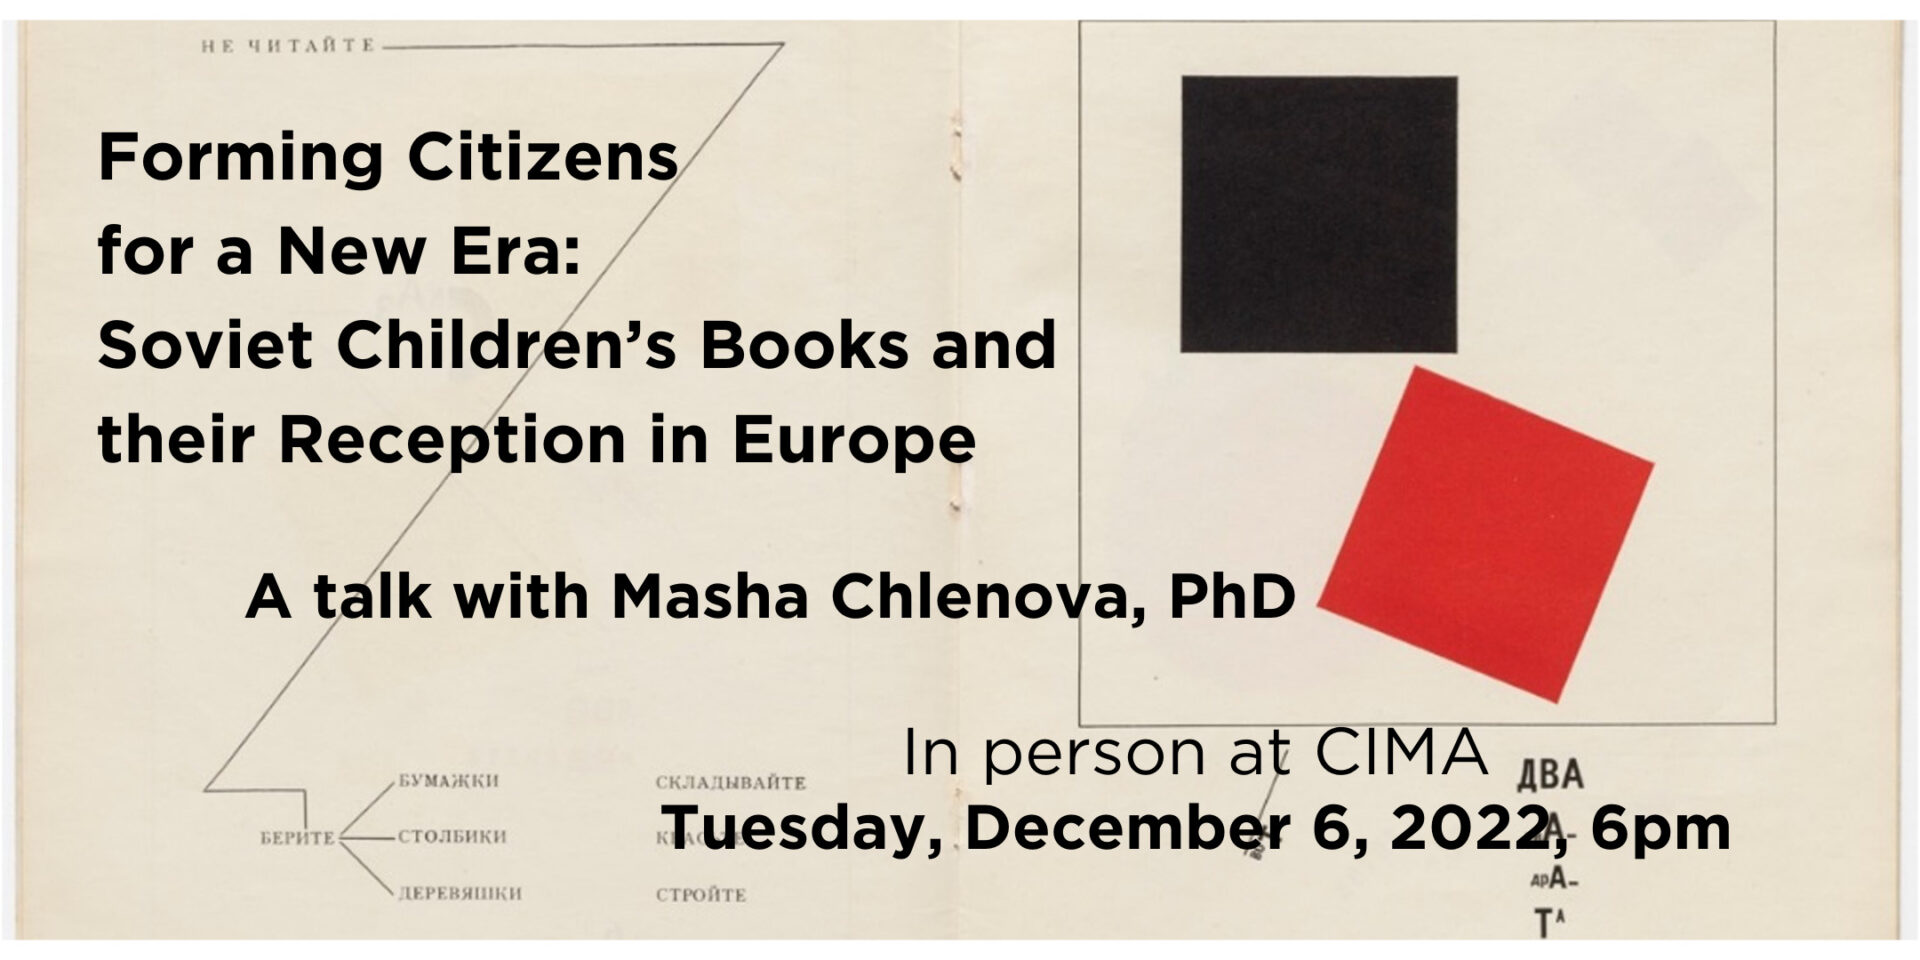 Forming Citizens for a New Era: Soviet Children’s Books and their Reception in Europe